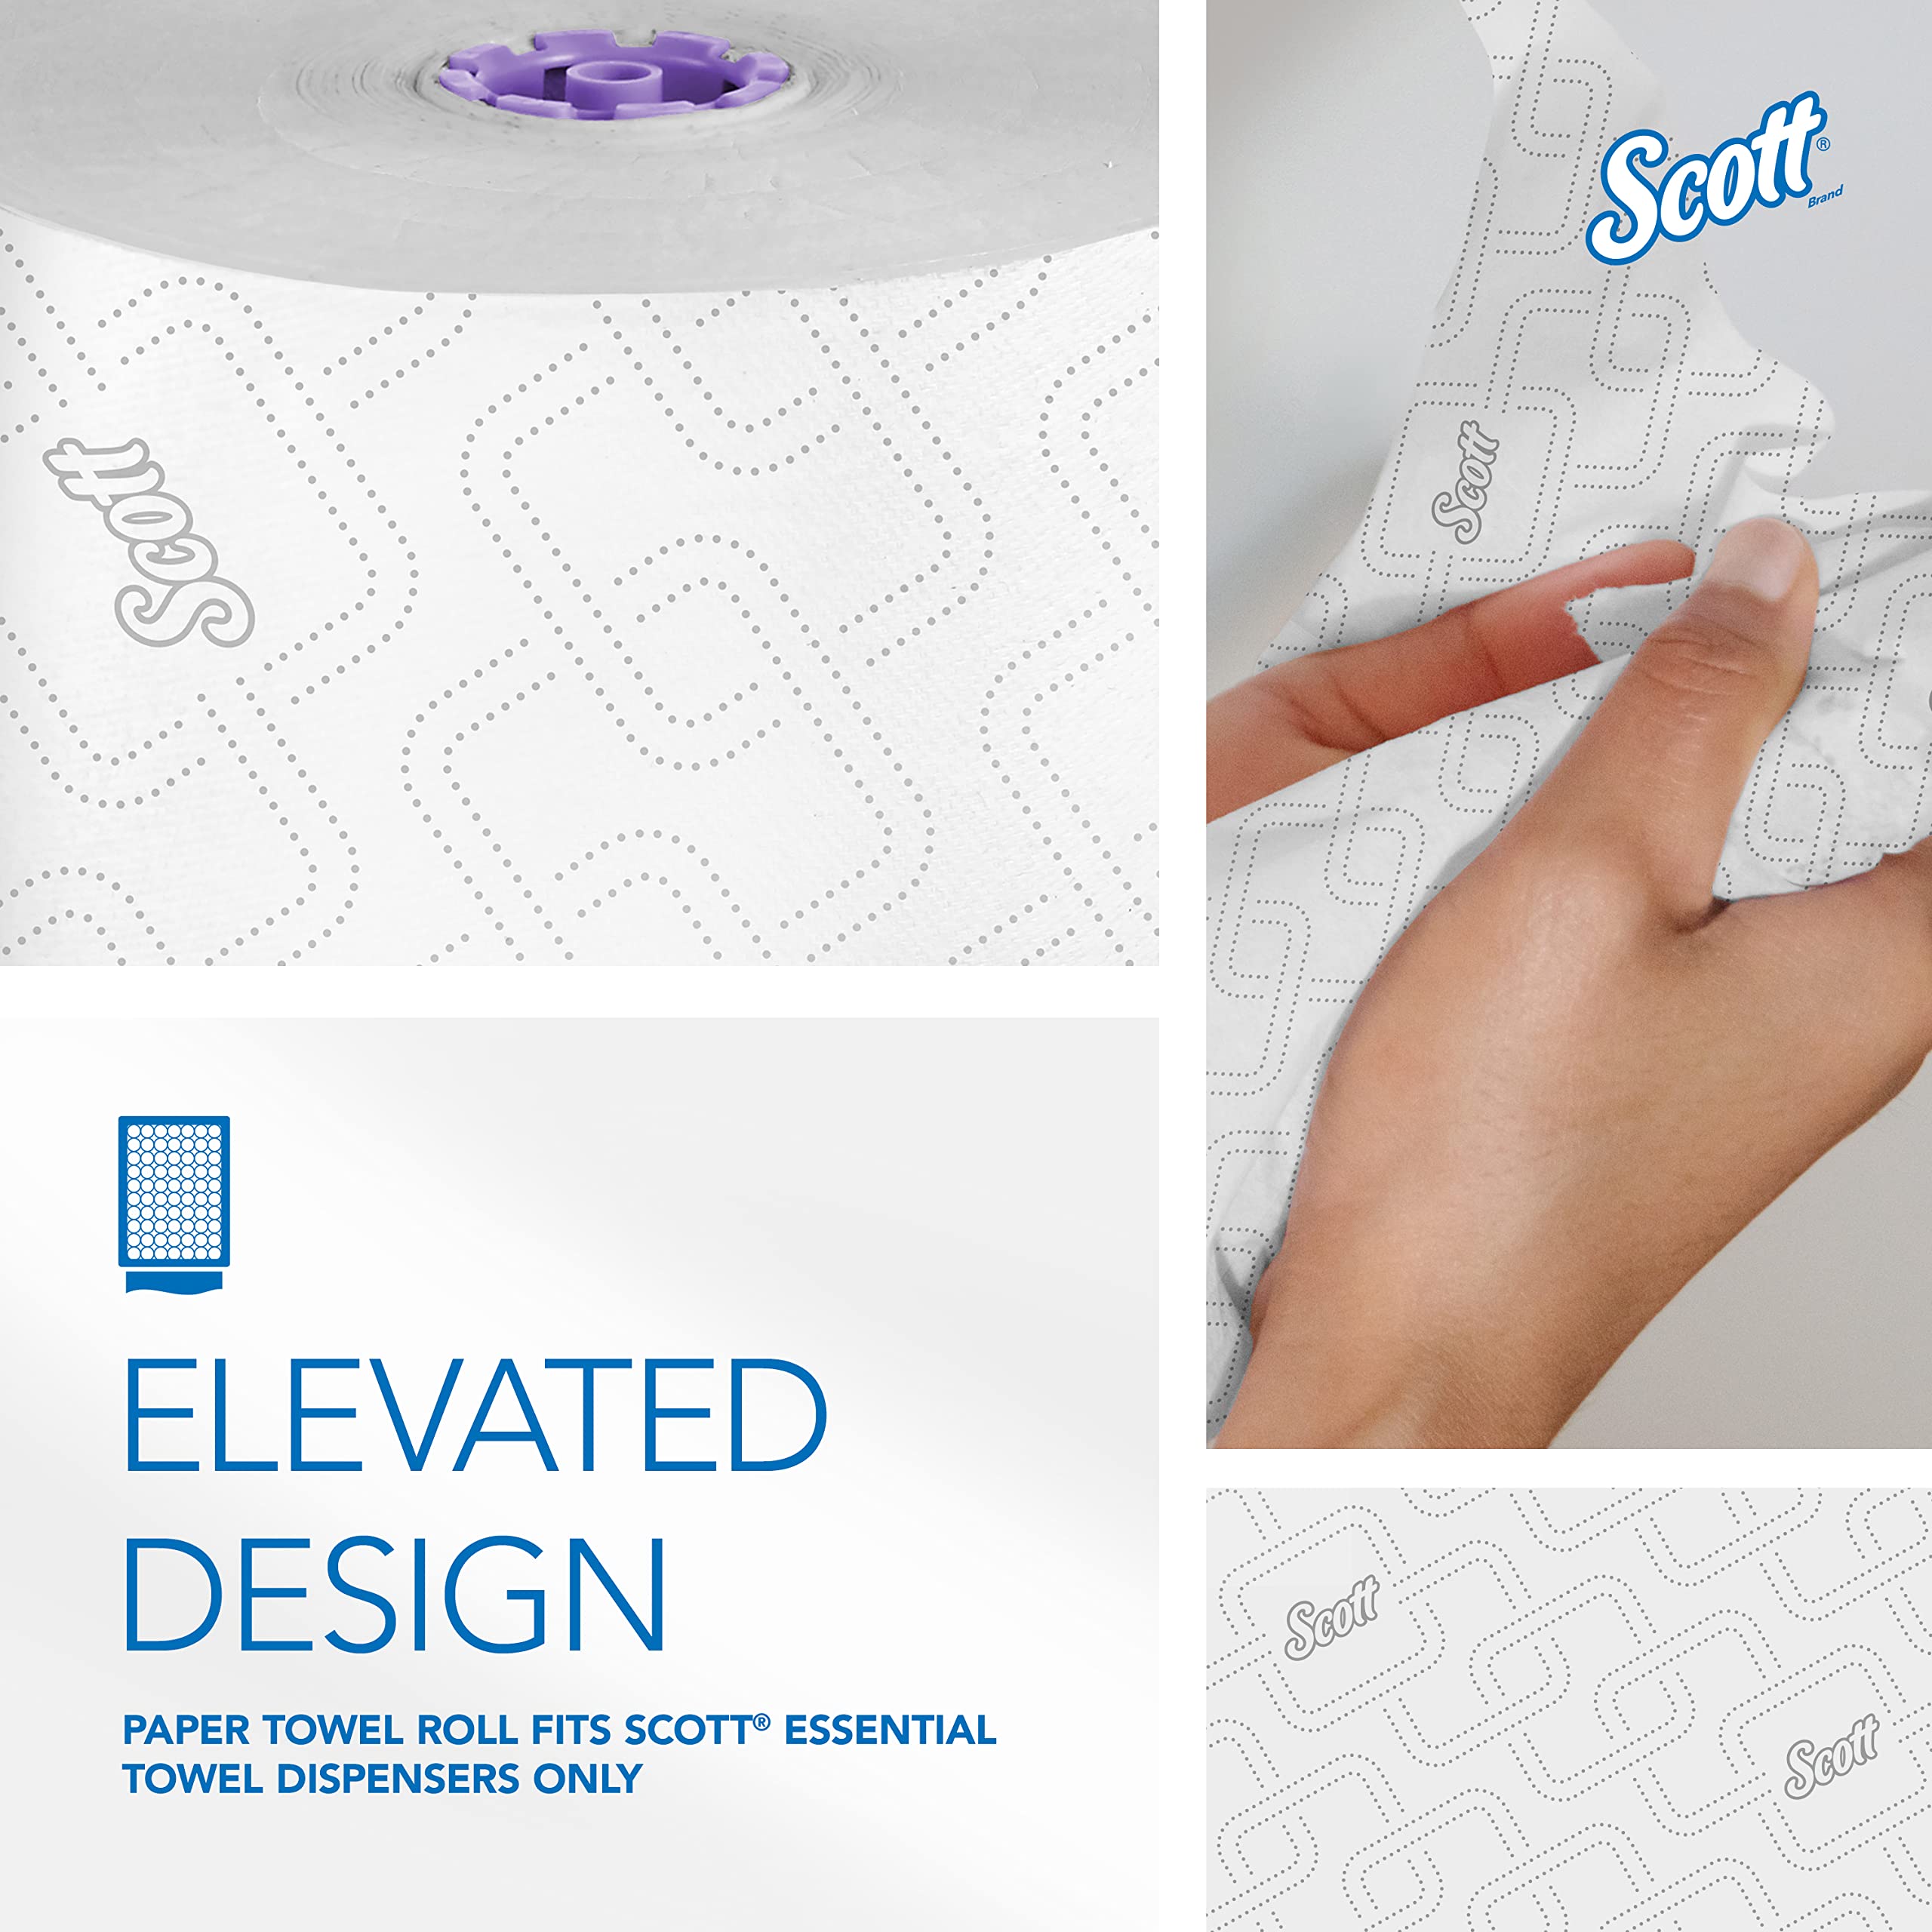 Scott® Essential High-Capacity Hard Roll Towels (02001), with Elevated Design and Absorbency Pockets™, for Purple Core Dispensers, White, Unperforated, (950'/Roll, 6 Rolls/Case, 5,700'/Case)